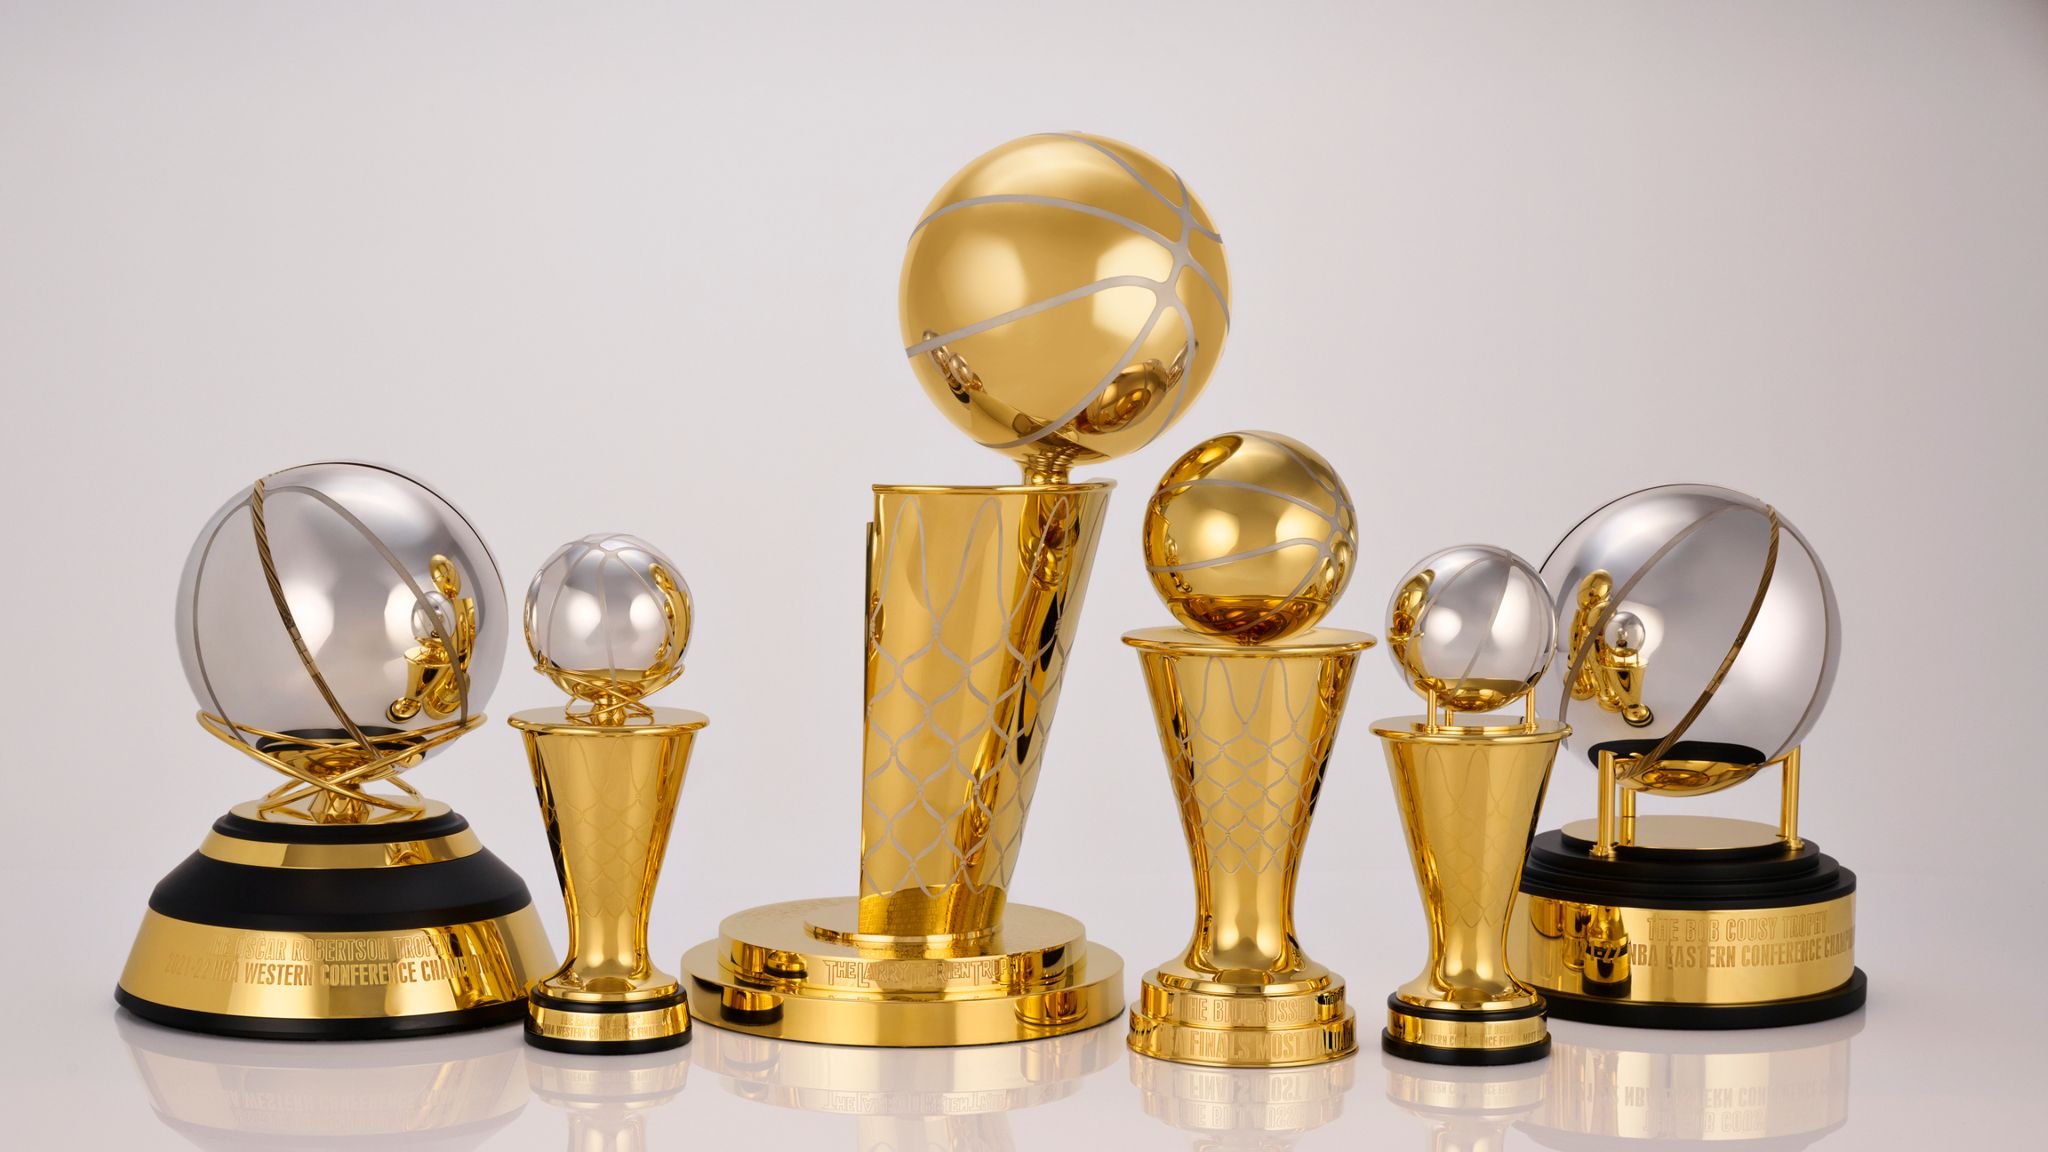 Larry O'Brien Trophy: The History of the NBA Finals Hardware - FanBuzz